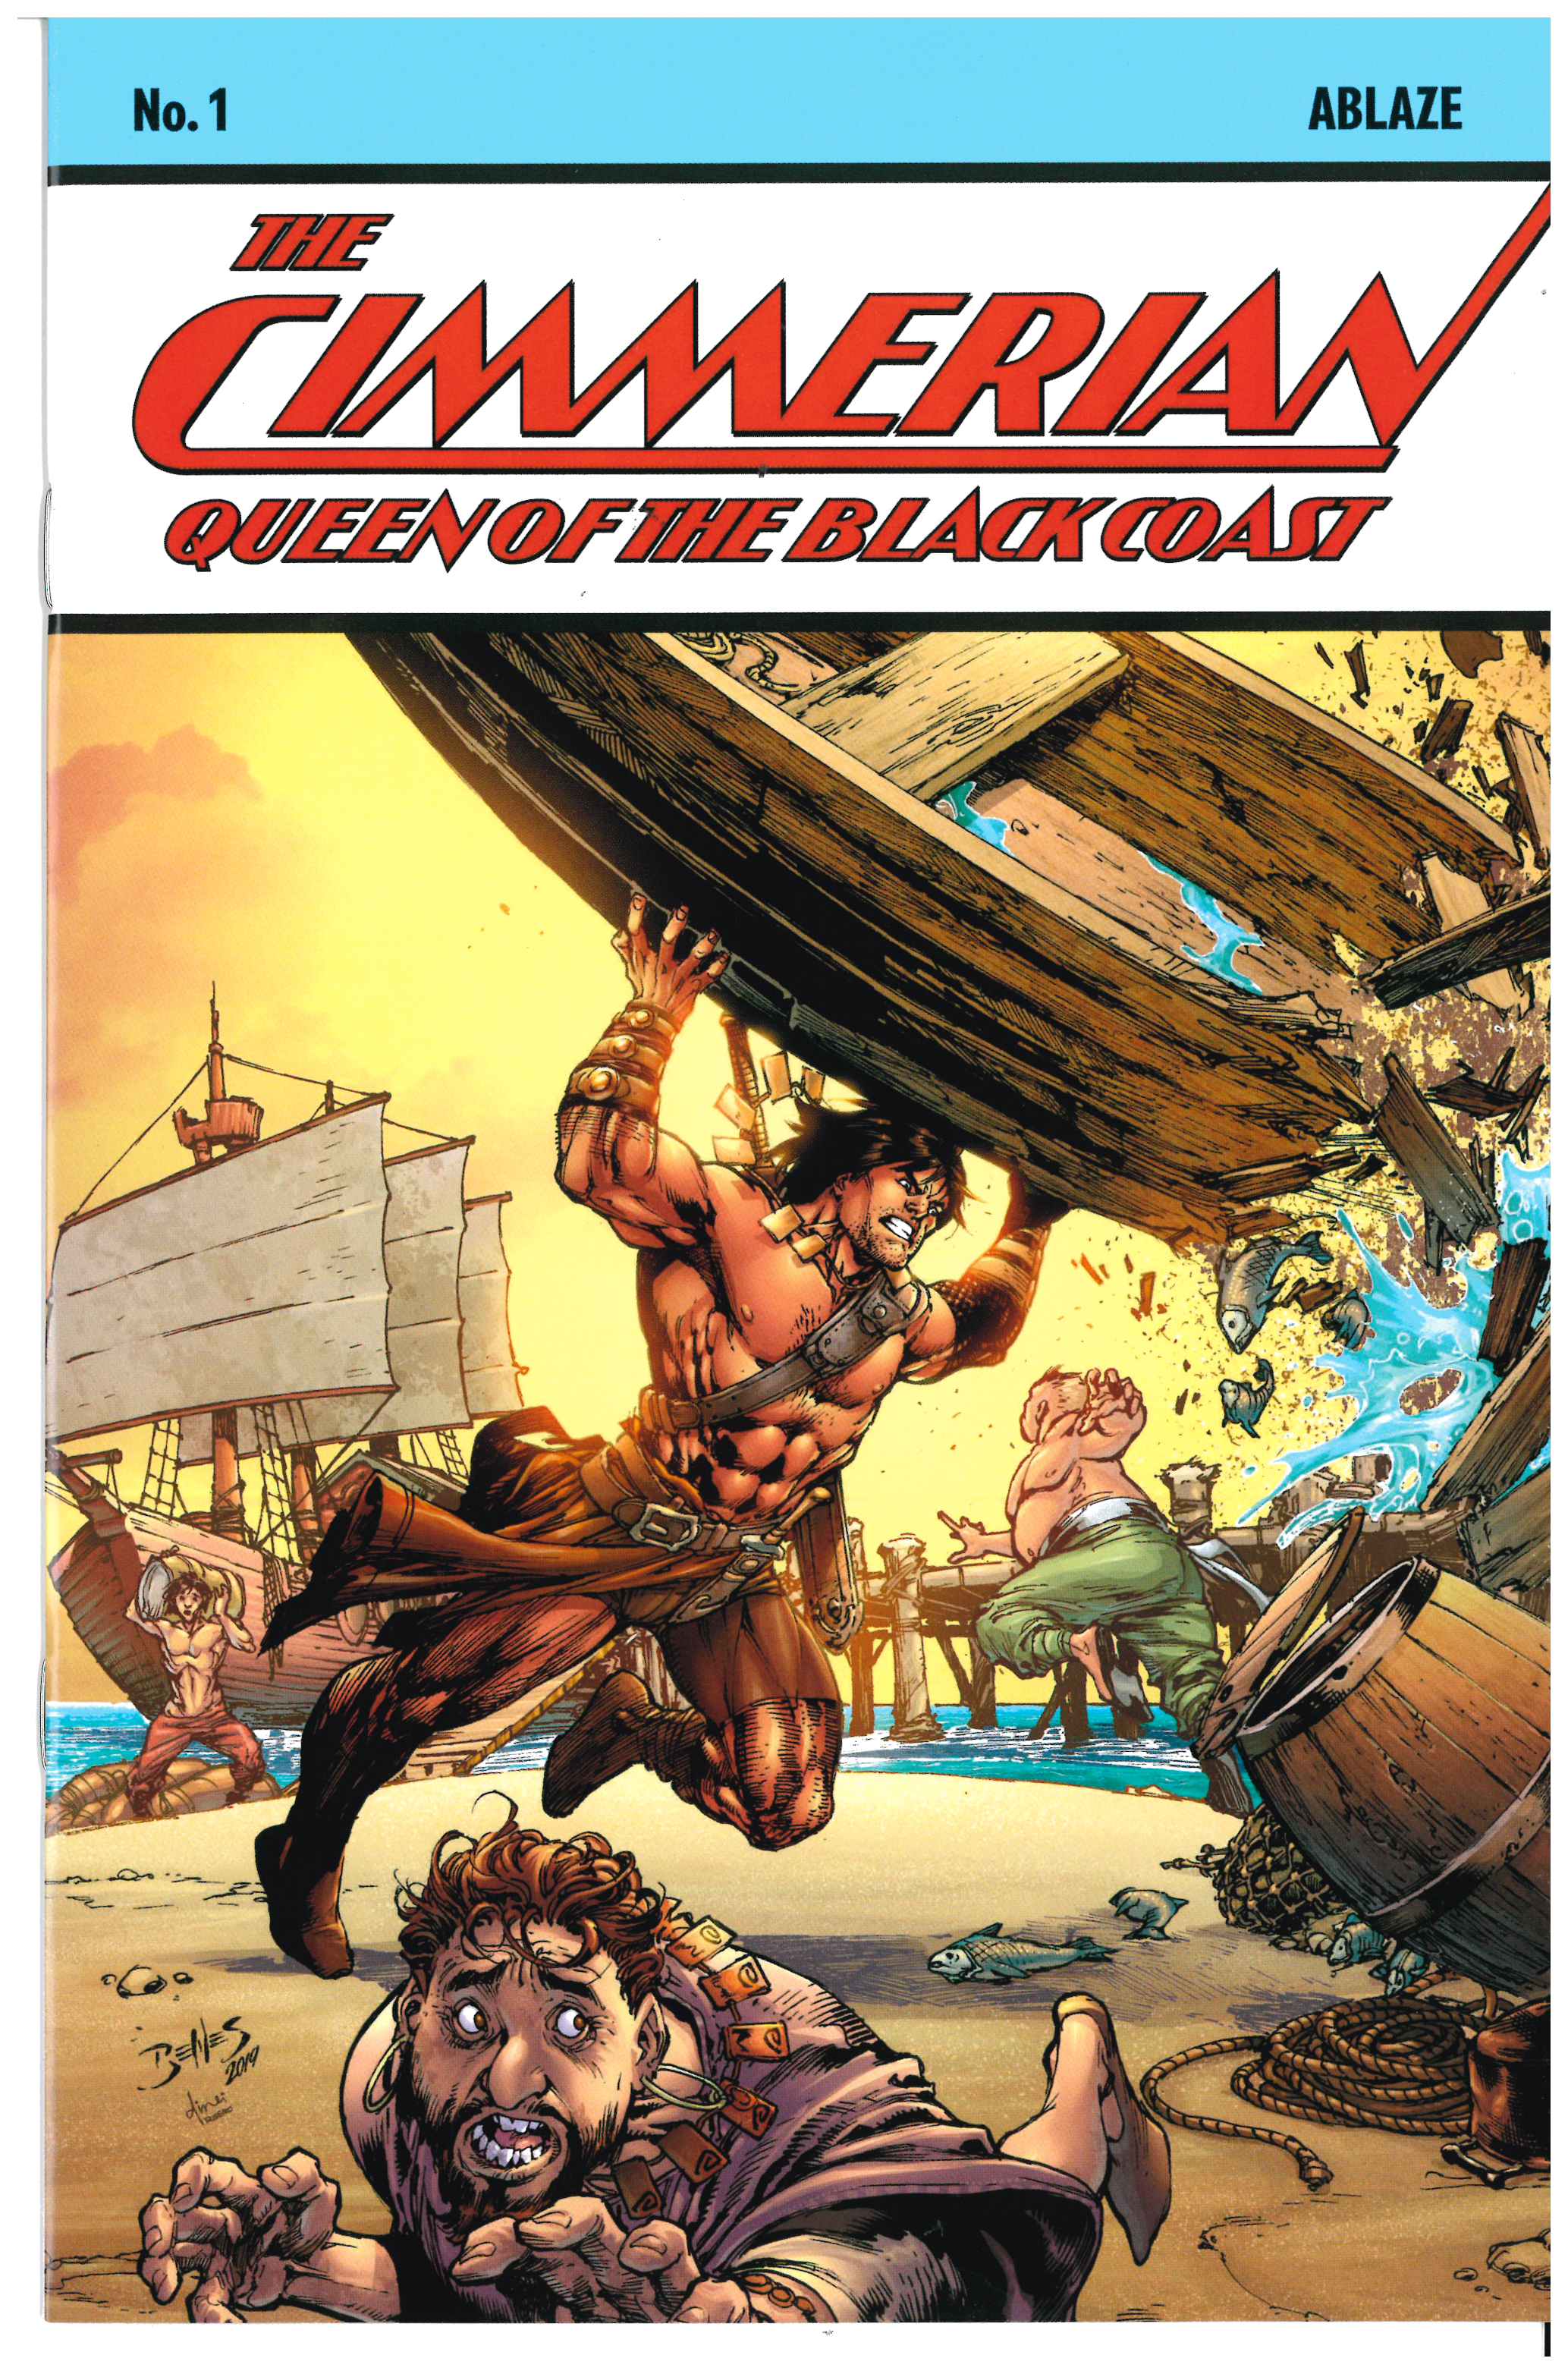 The Cimmerian: Queen Of The Black Coast #1